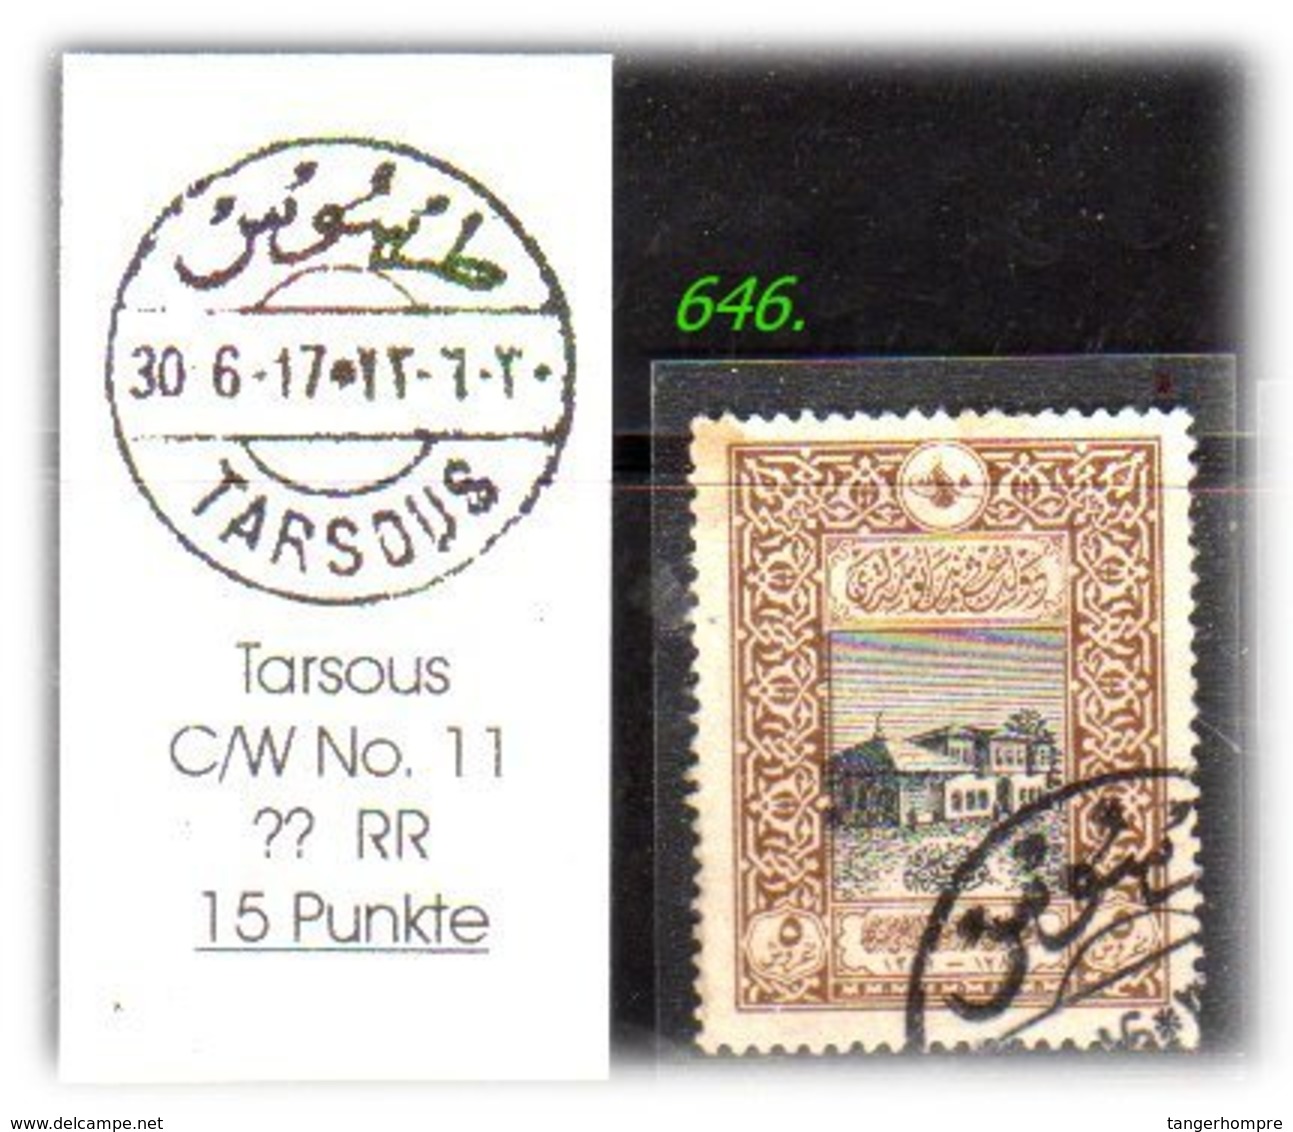 EARLY OTTOMAN SPECIALIZED FOR SPECIALIST, SEE....Stempel - TARSOUS -RR- - Gebraucht